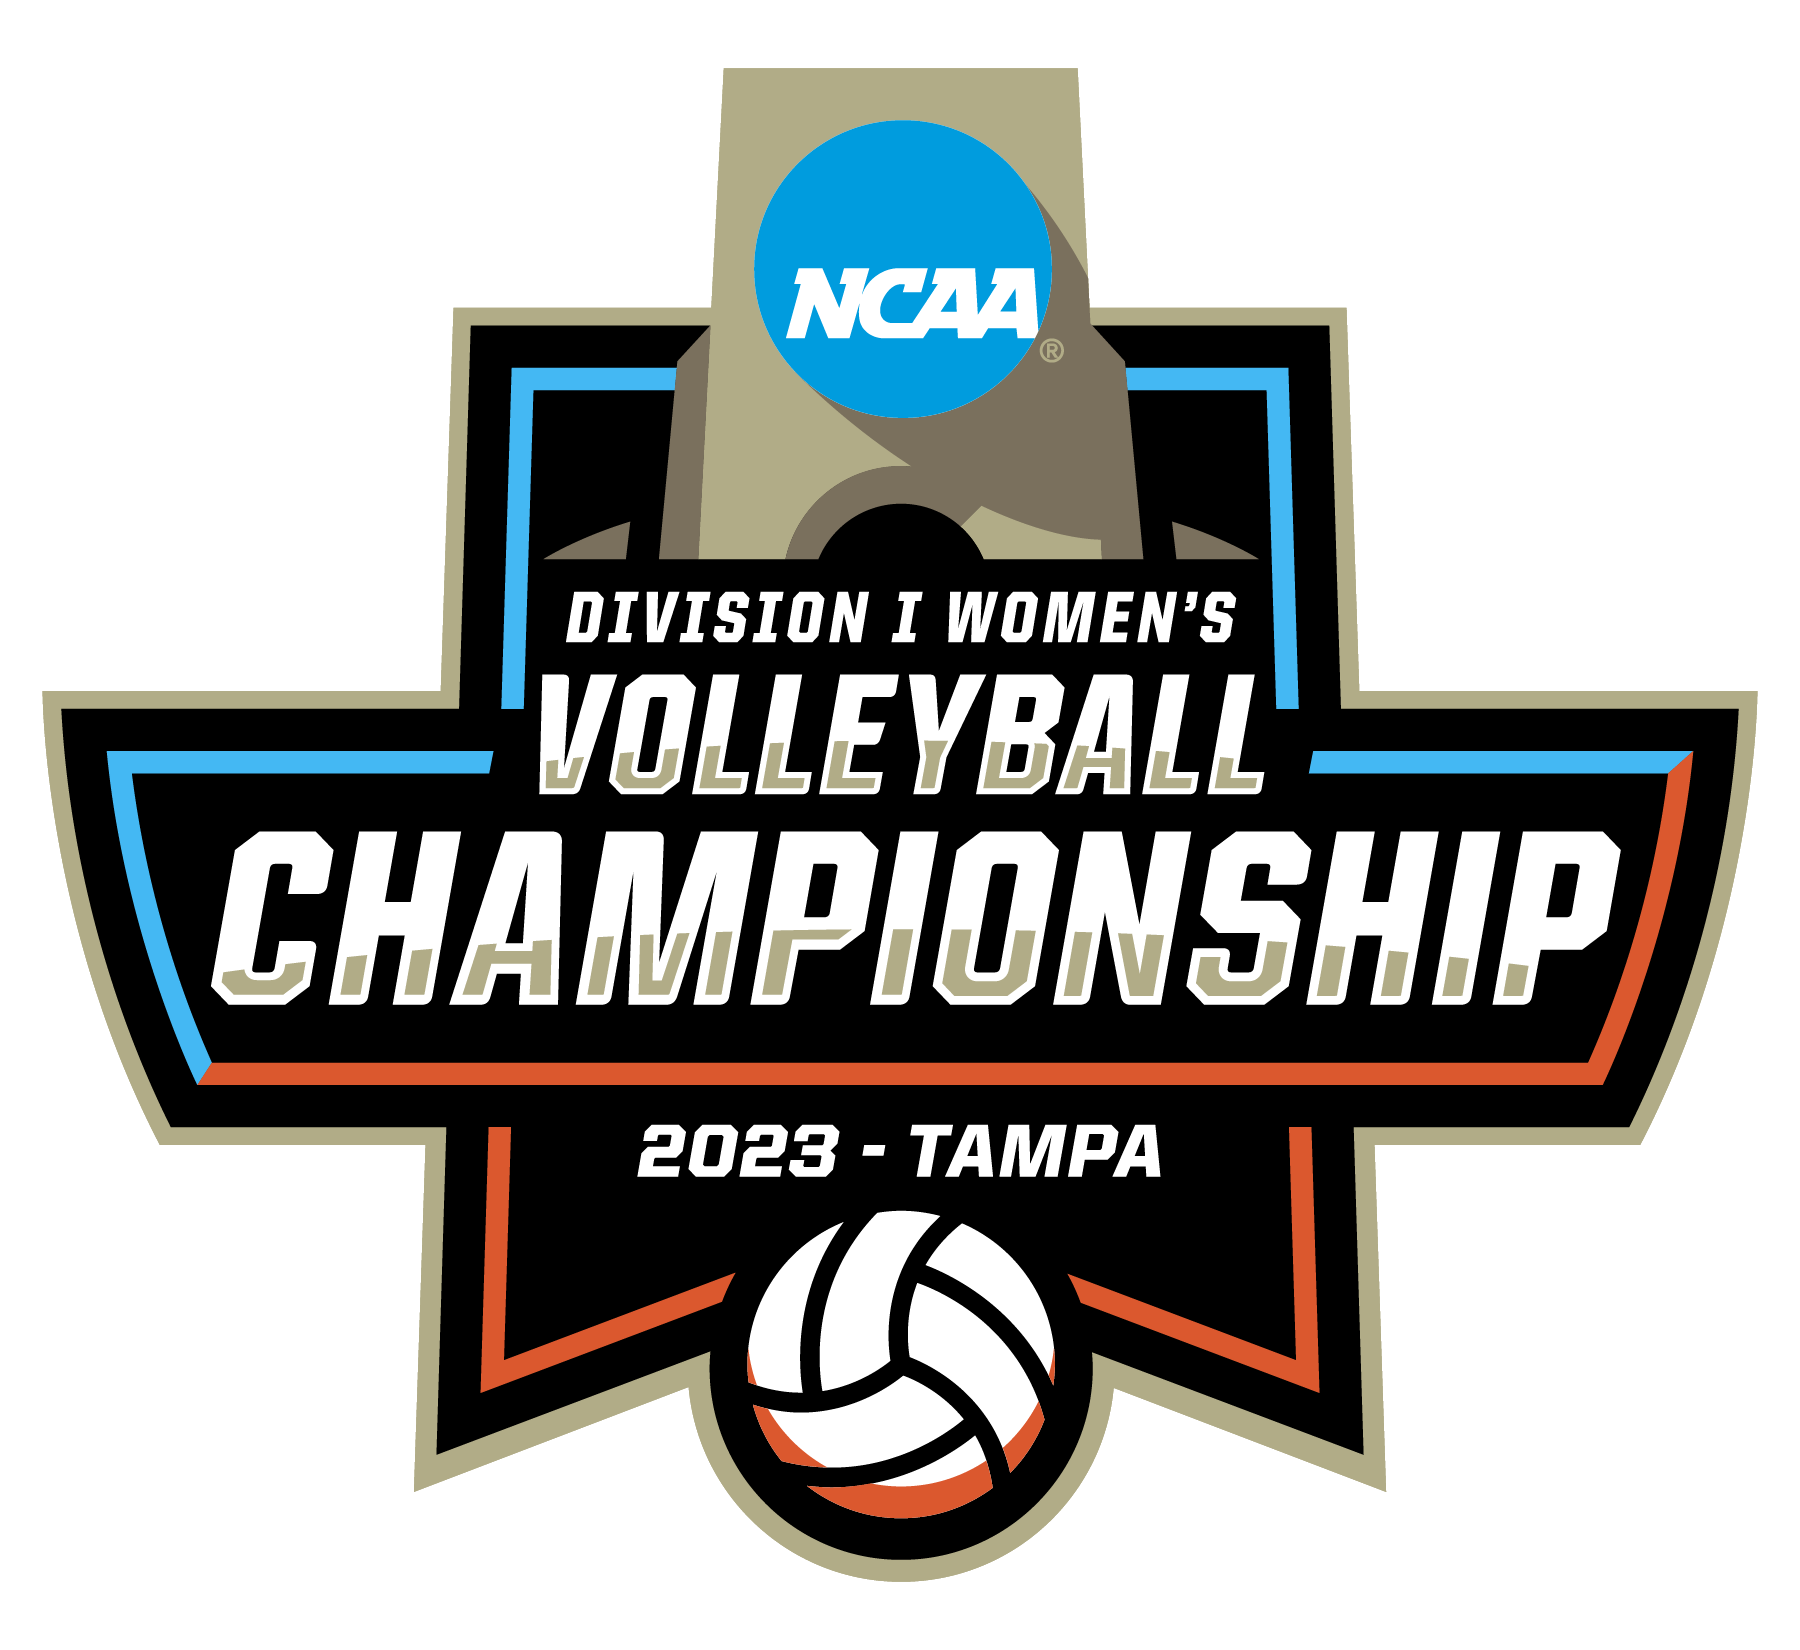 Division I Women's Volleyball Championship